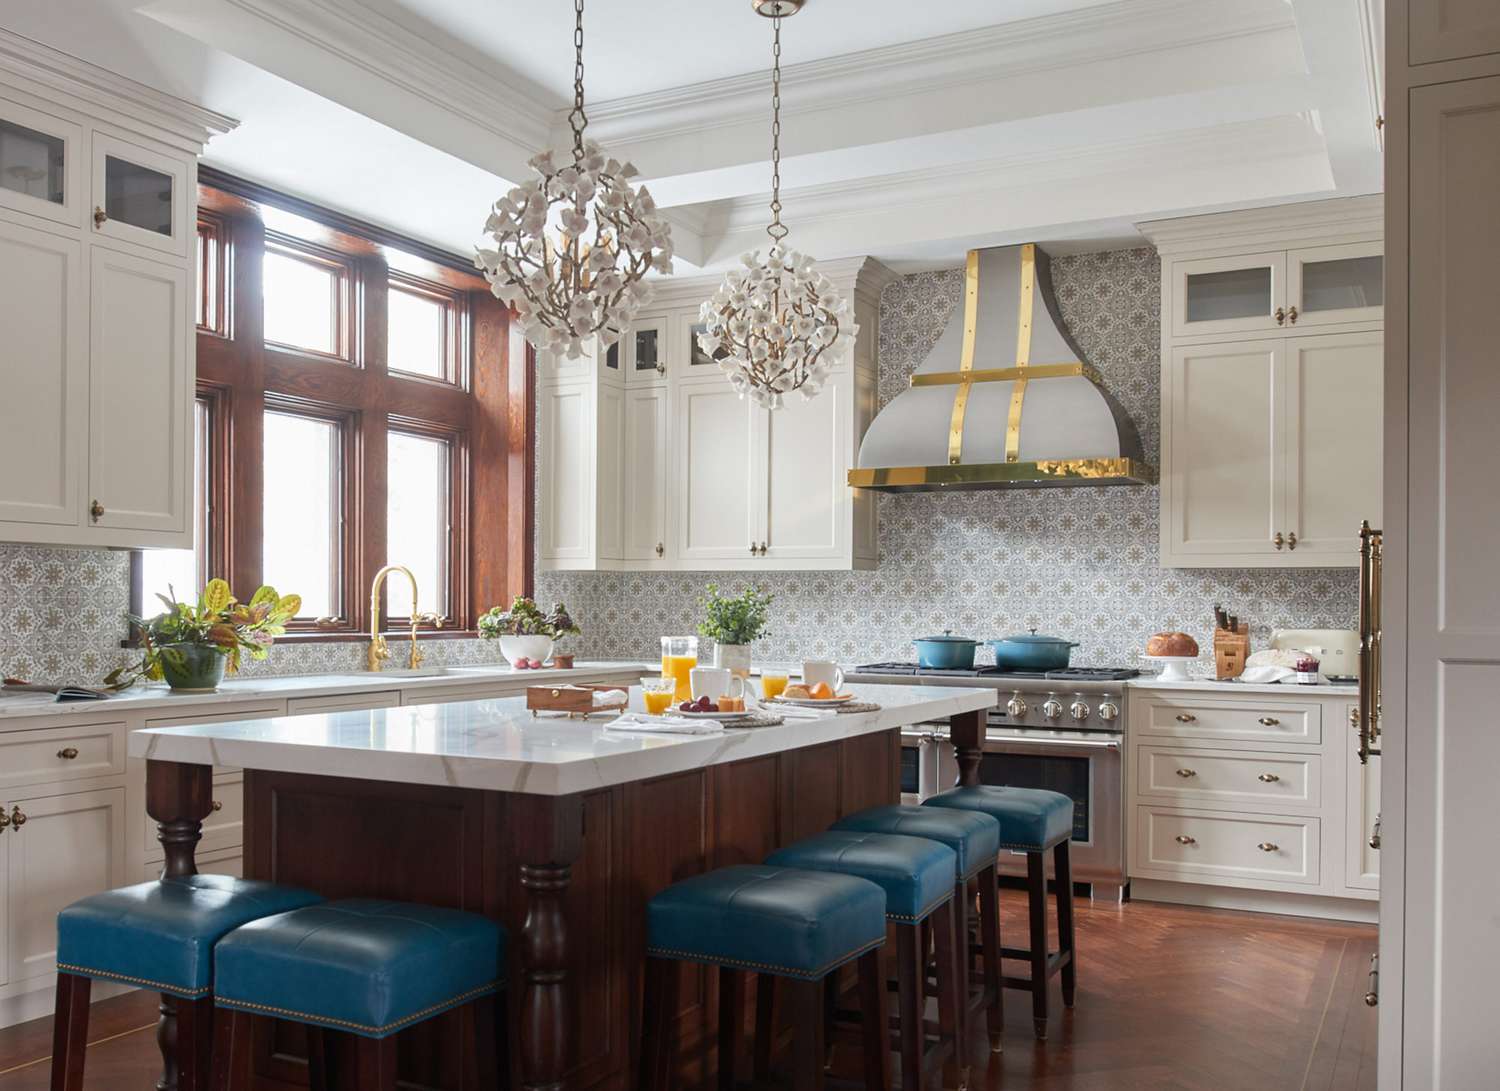 French Country inspired open kitchen